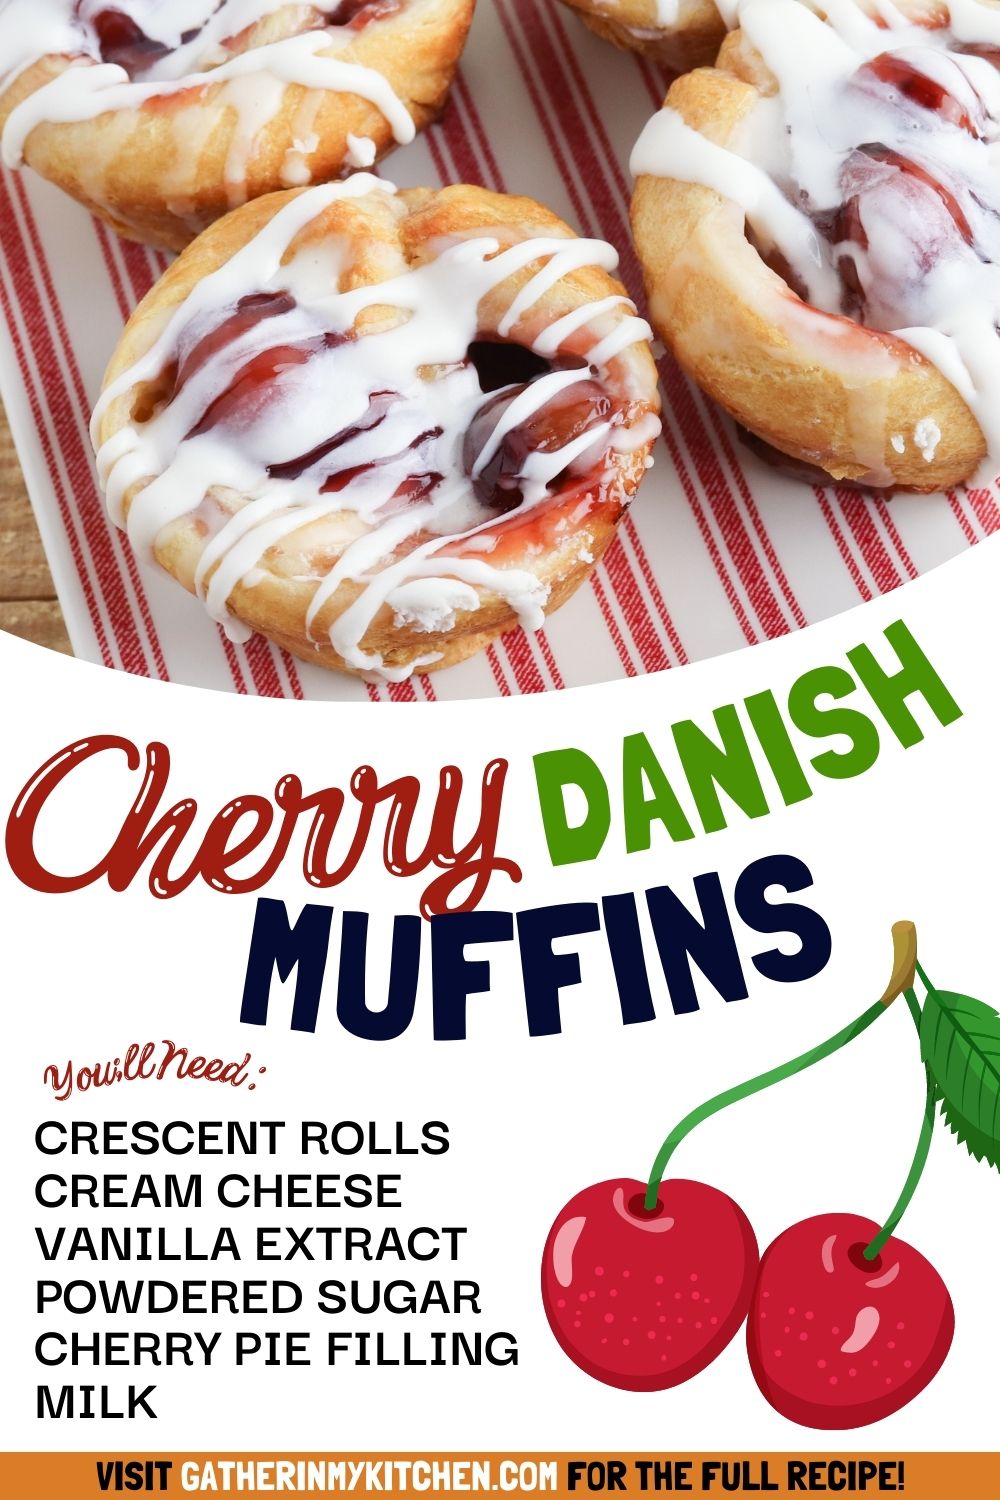 Cherry Danish muffins on top, with "Cherry Danish Muffins" and the ingredients underneath as well as an image of cherries.